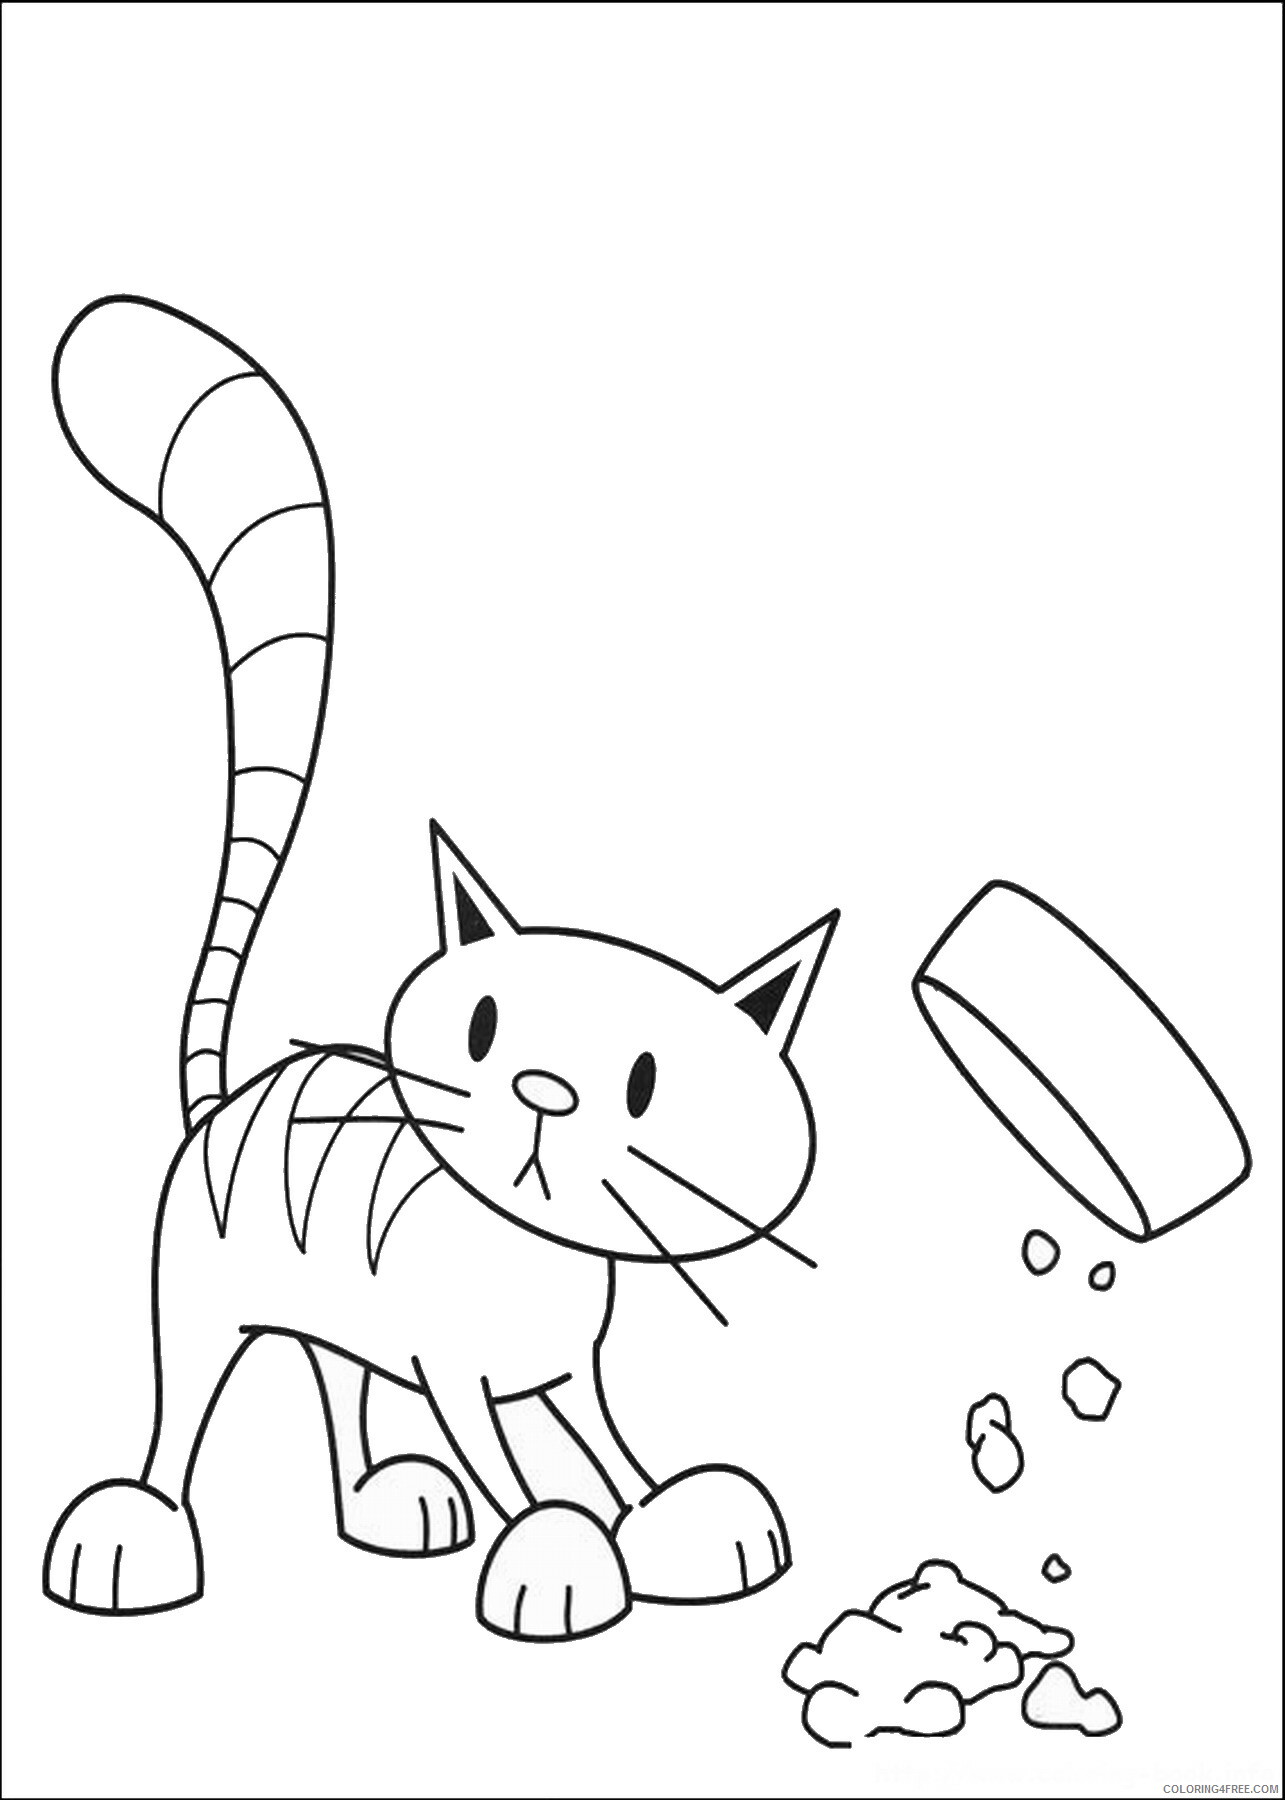 Cat Coloring Pages Animal Printable Sheets cats_10 2021 0823 Coloring4free